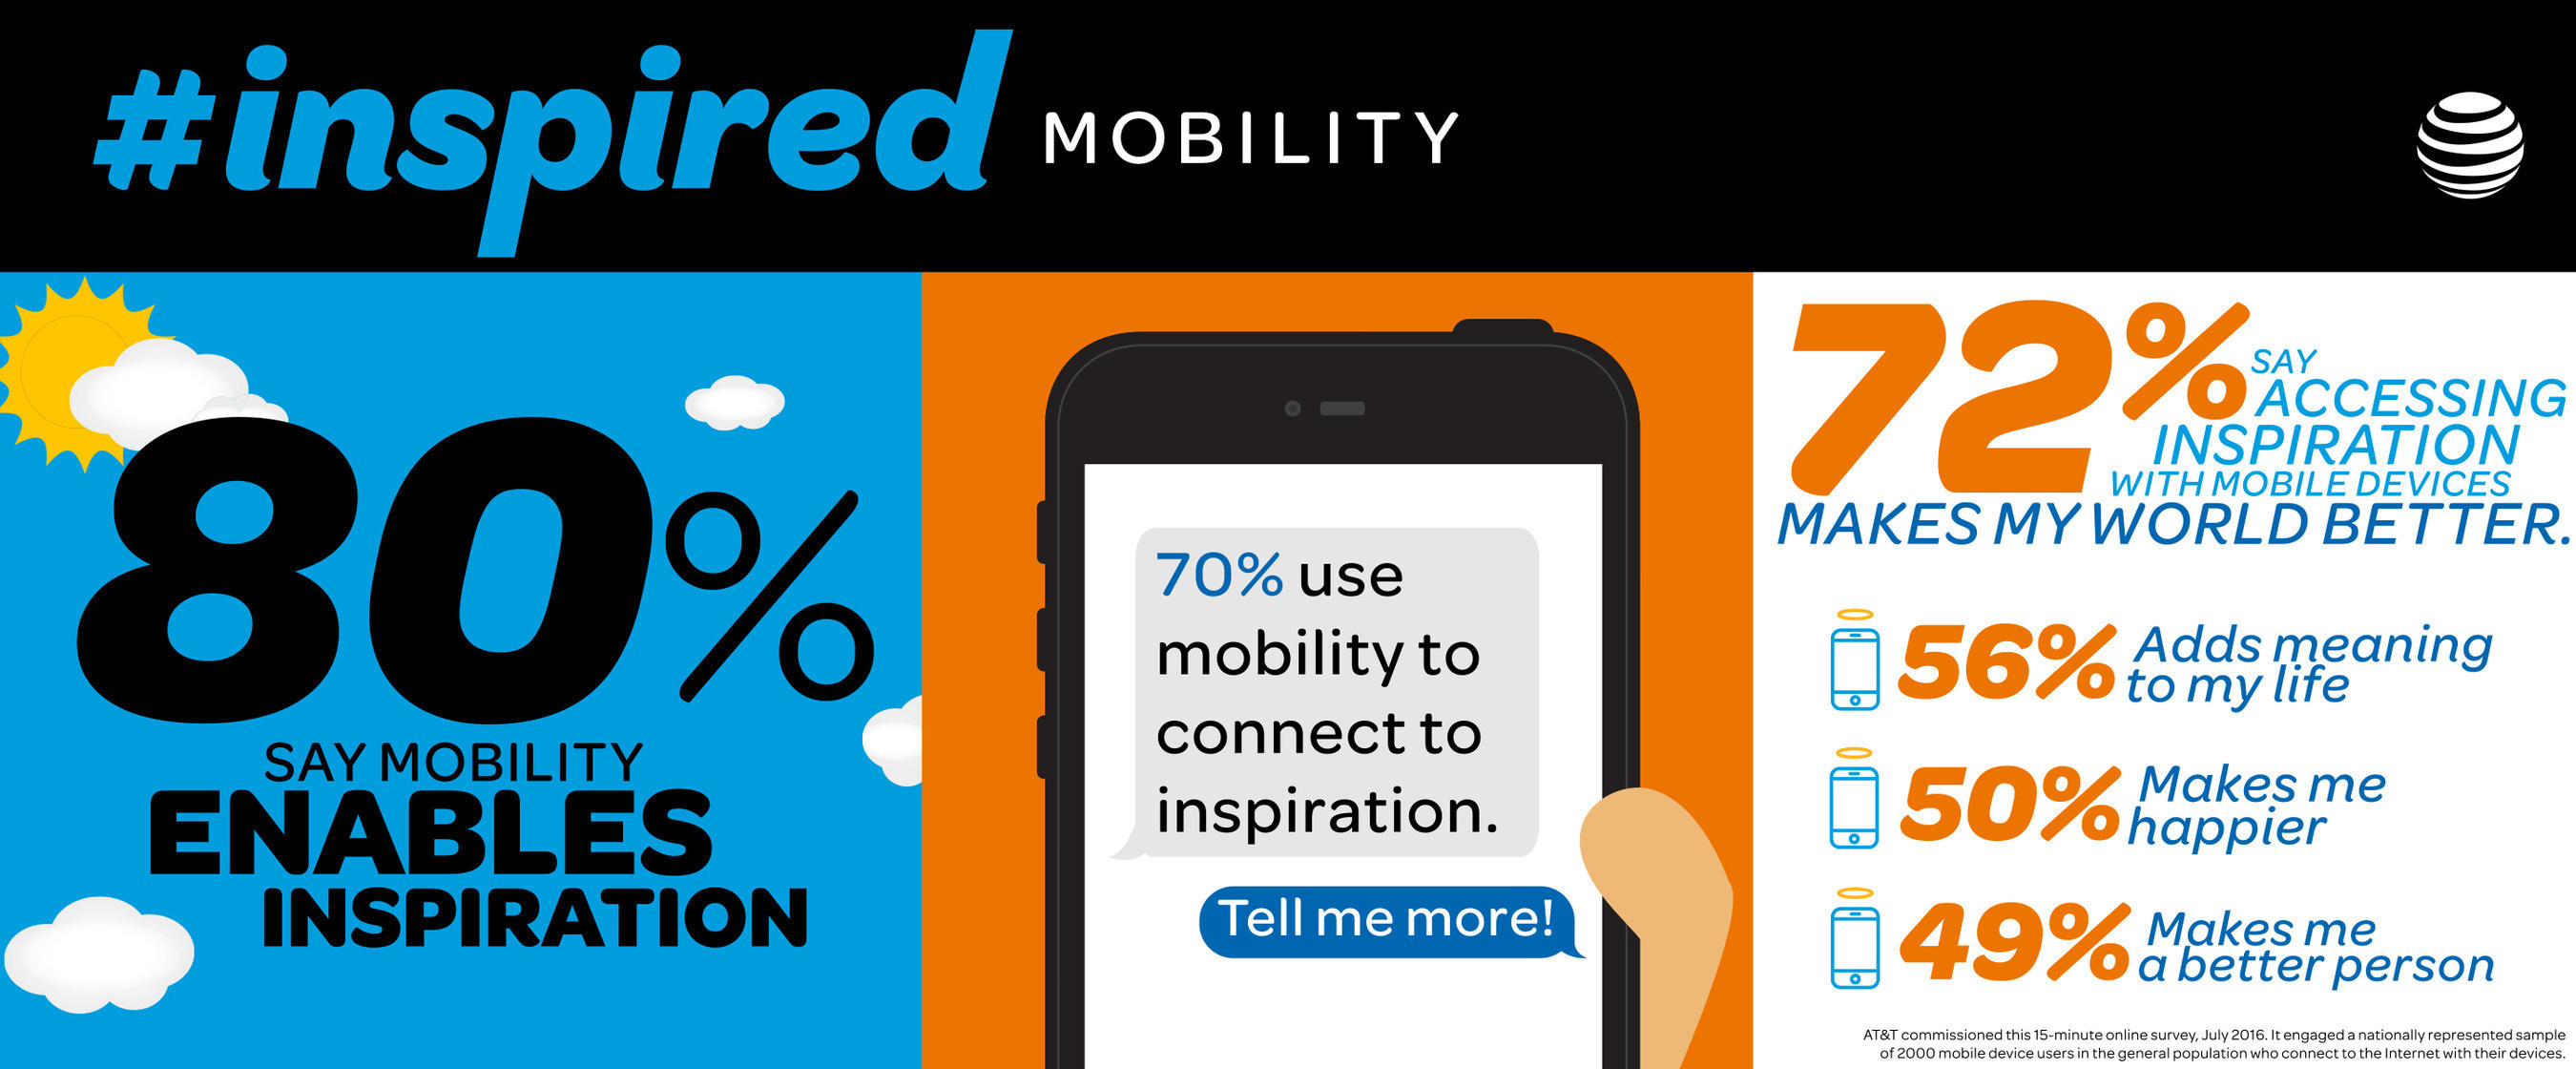 New research from AT&T Americans find inspiration on their smartphones and tablets. They believe it makes their world a better place.